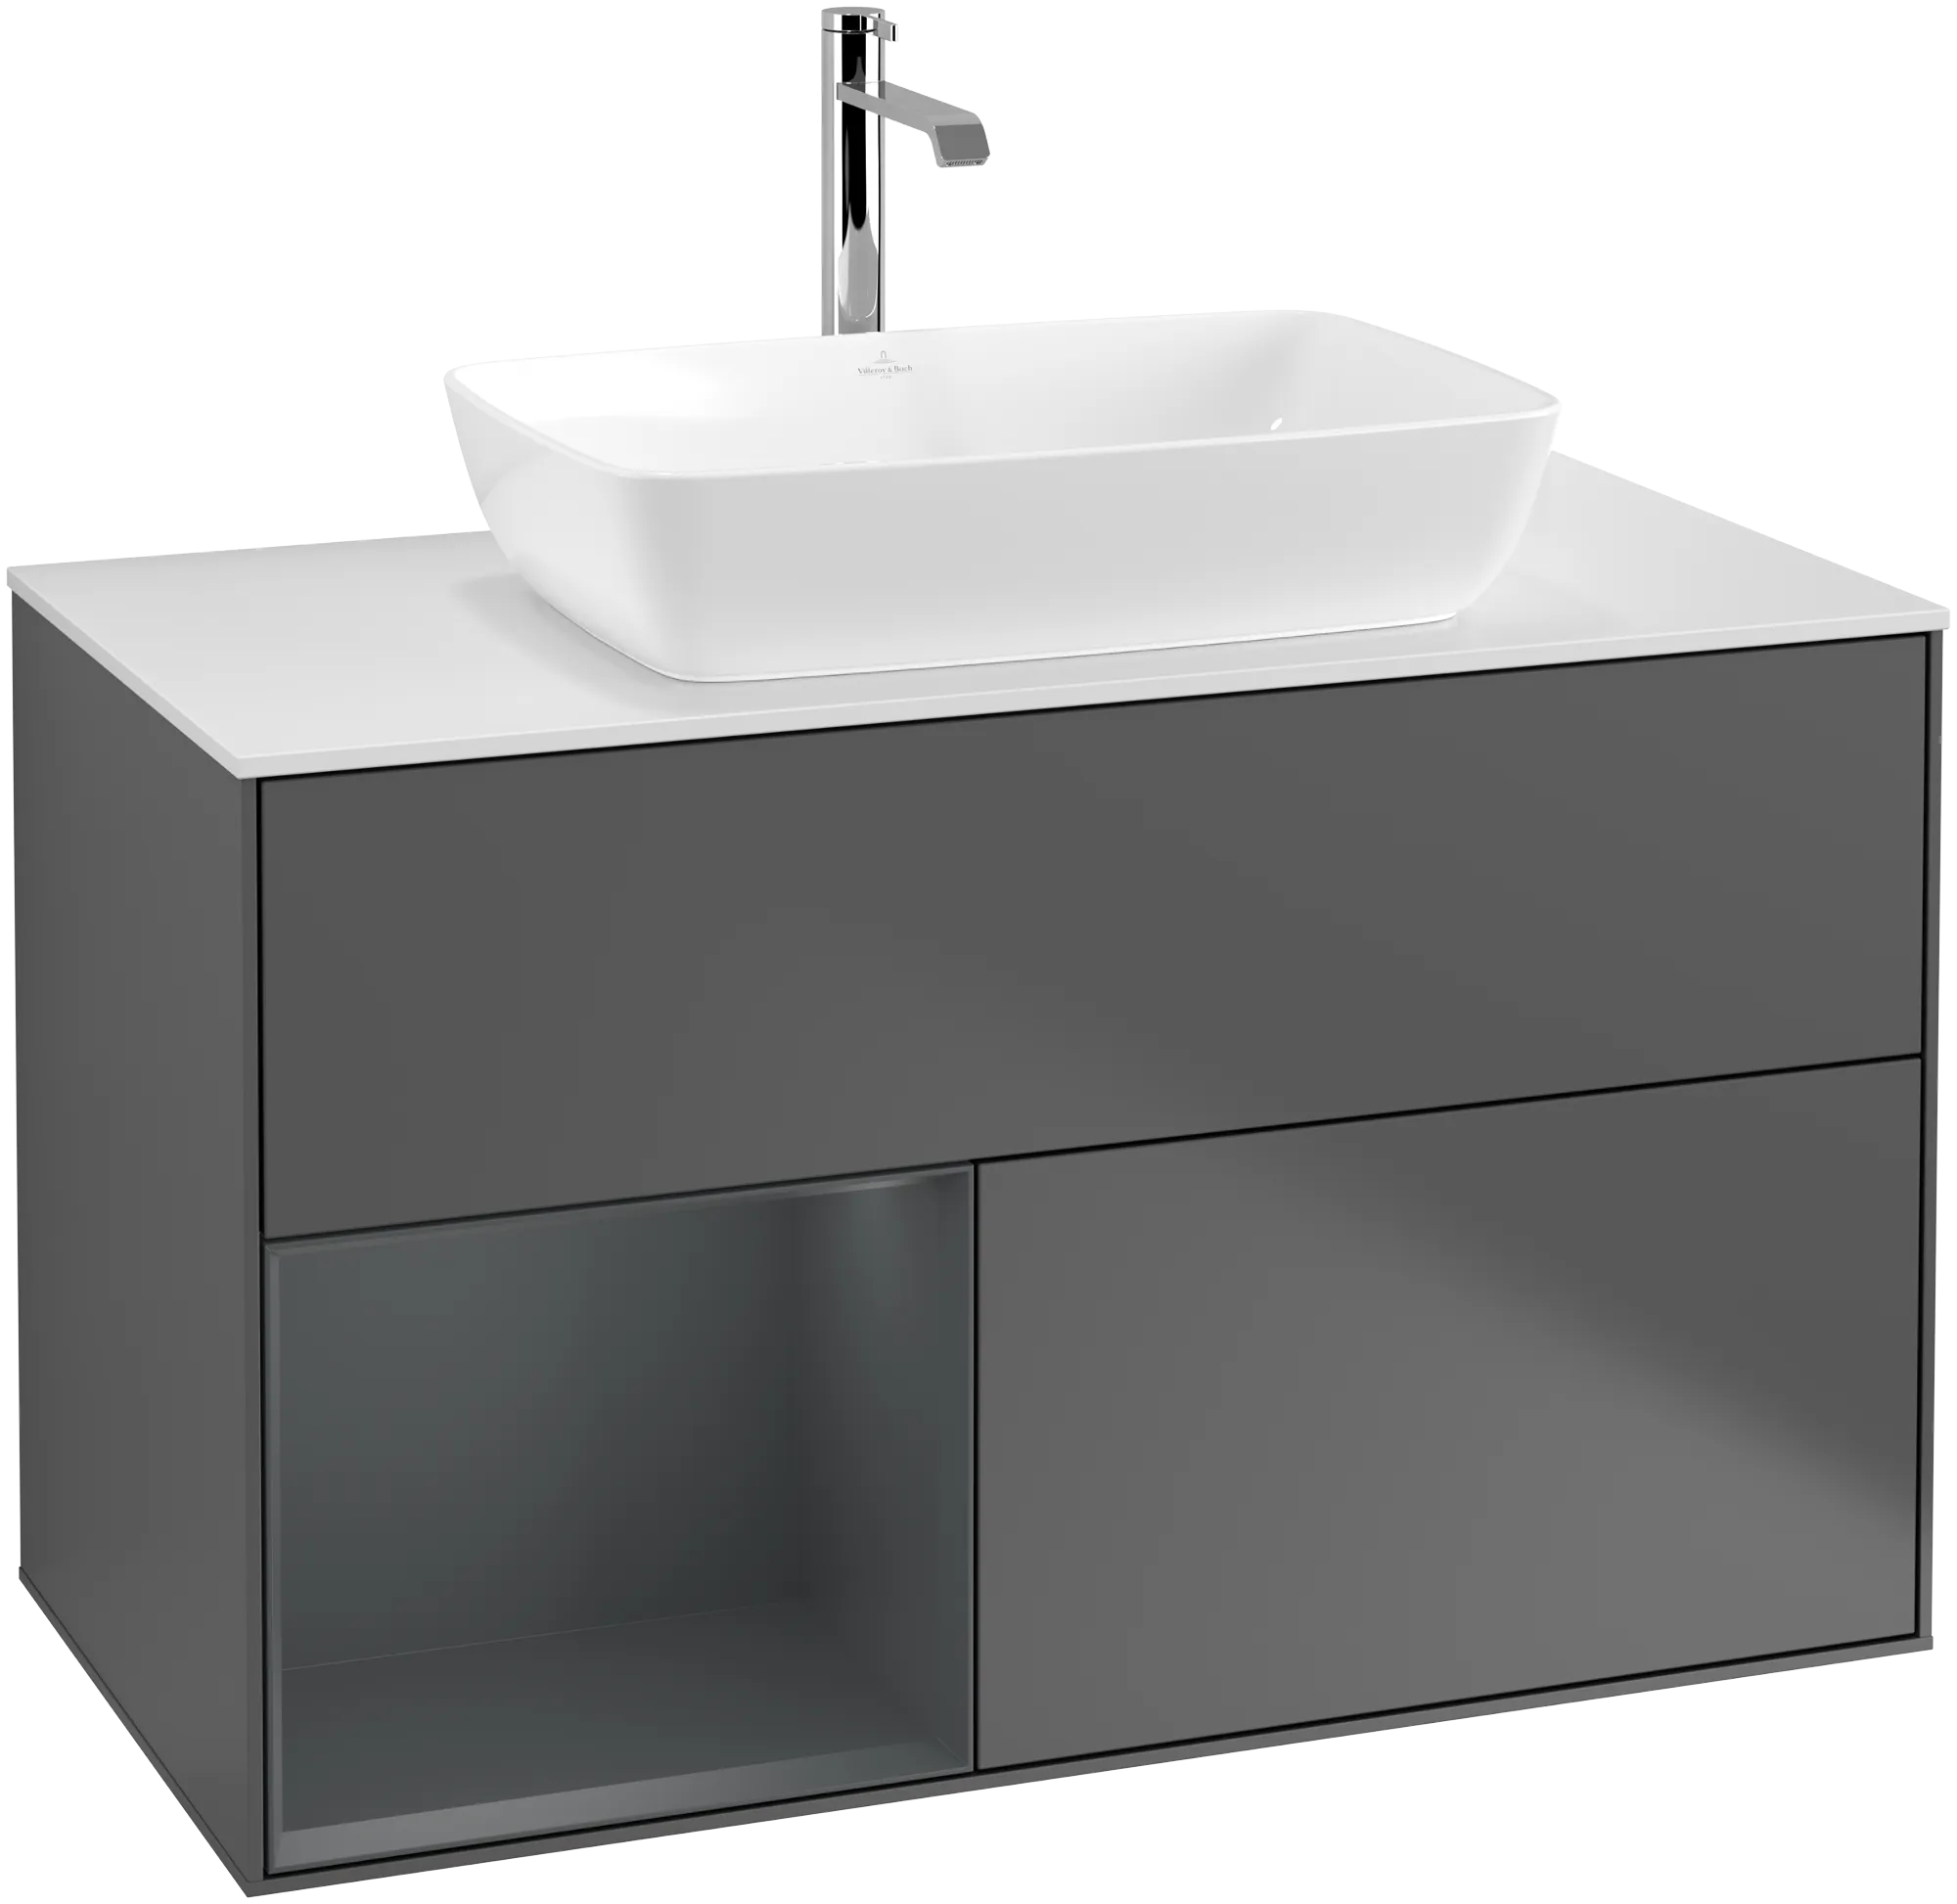 Picture of VILLEROY BOCH Finion Vanity unit, with lighting, 2 pull-out compartments, 1000 x 603 x 501 mm, Anthracite Matt Lacquer / Midnight Blue Matt Lacquer / Glass White Matt #G771HGGK